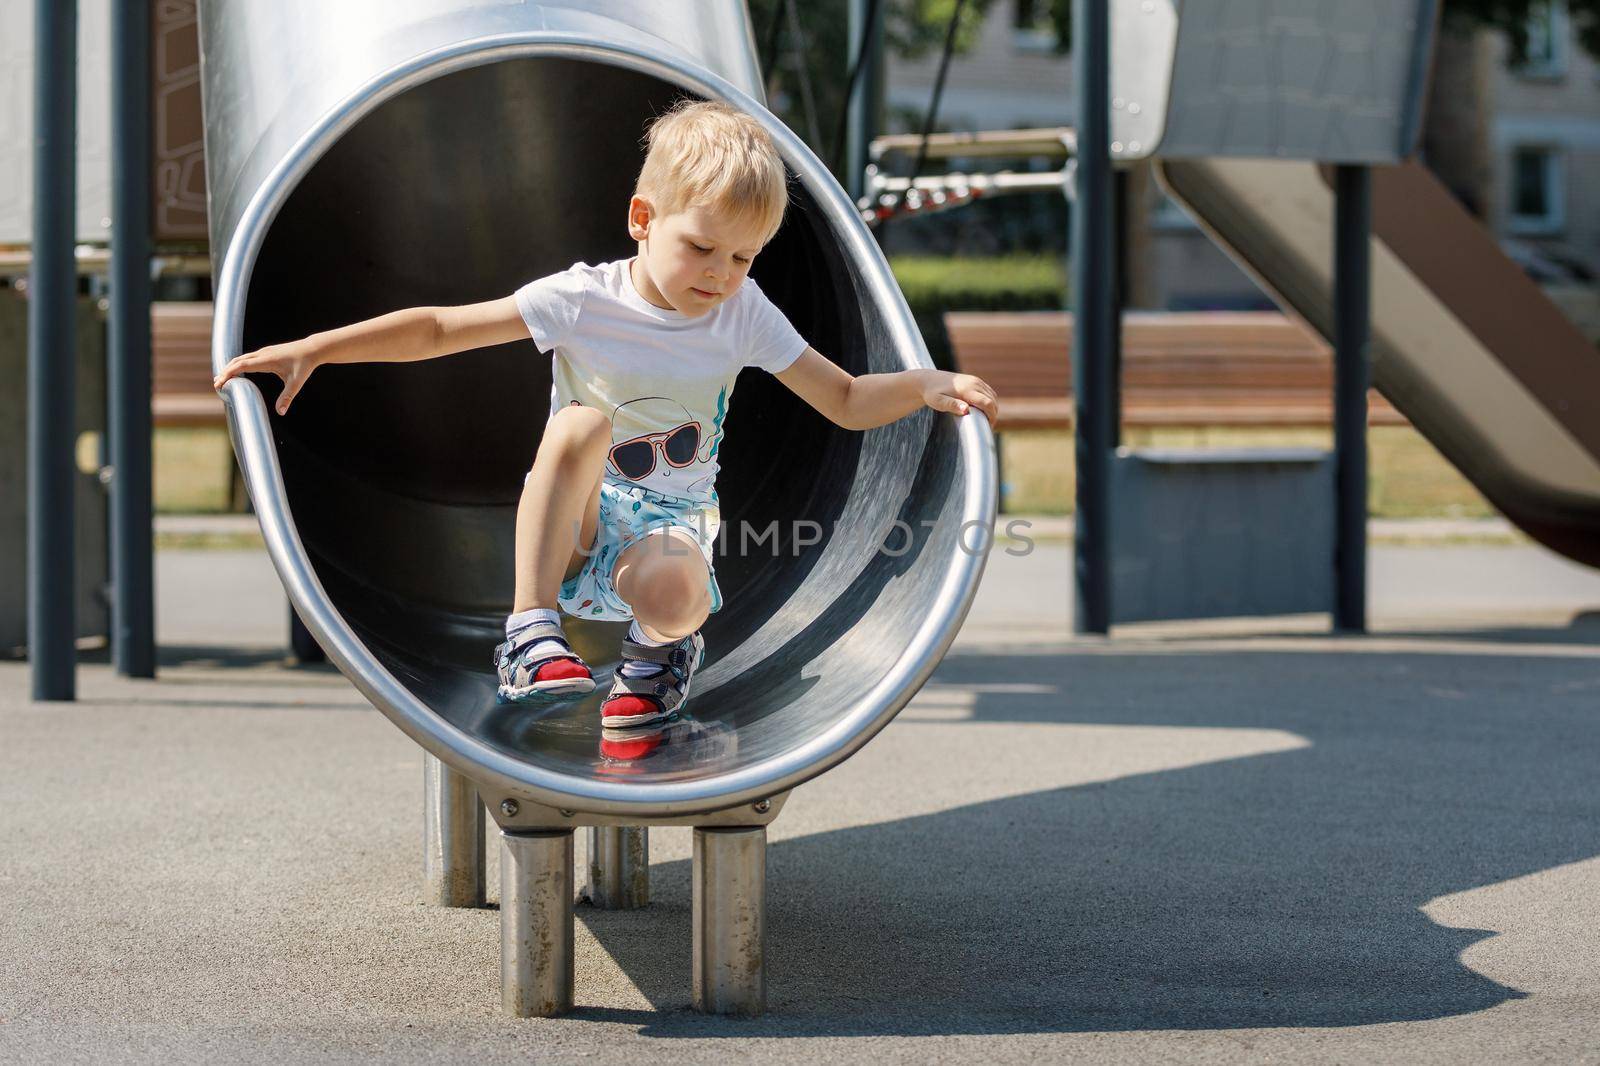 Boy child climbing sliding and playing on metal slide on outdoor playground in summer park. Activity and amusement center in kindergarten or school yard. Toddler kid outdoors.